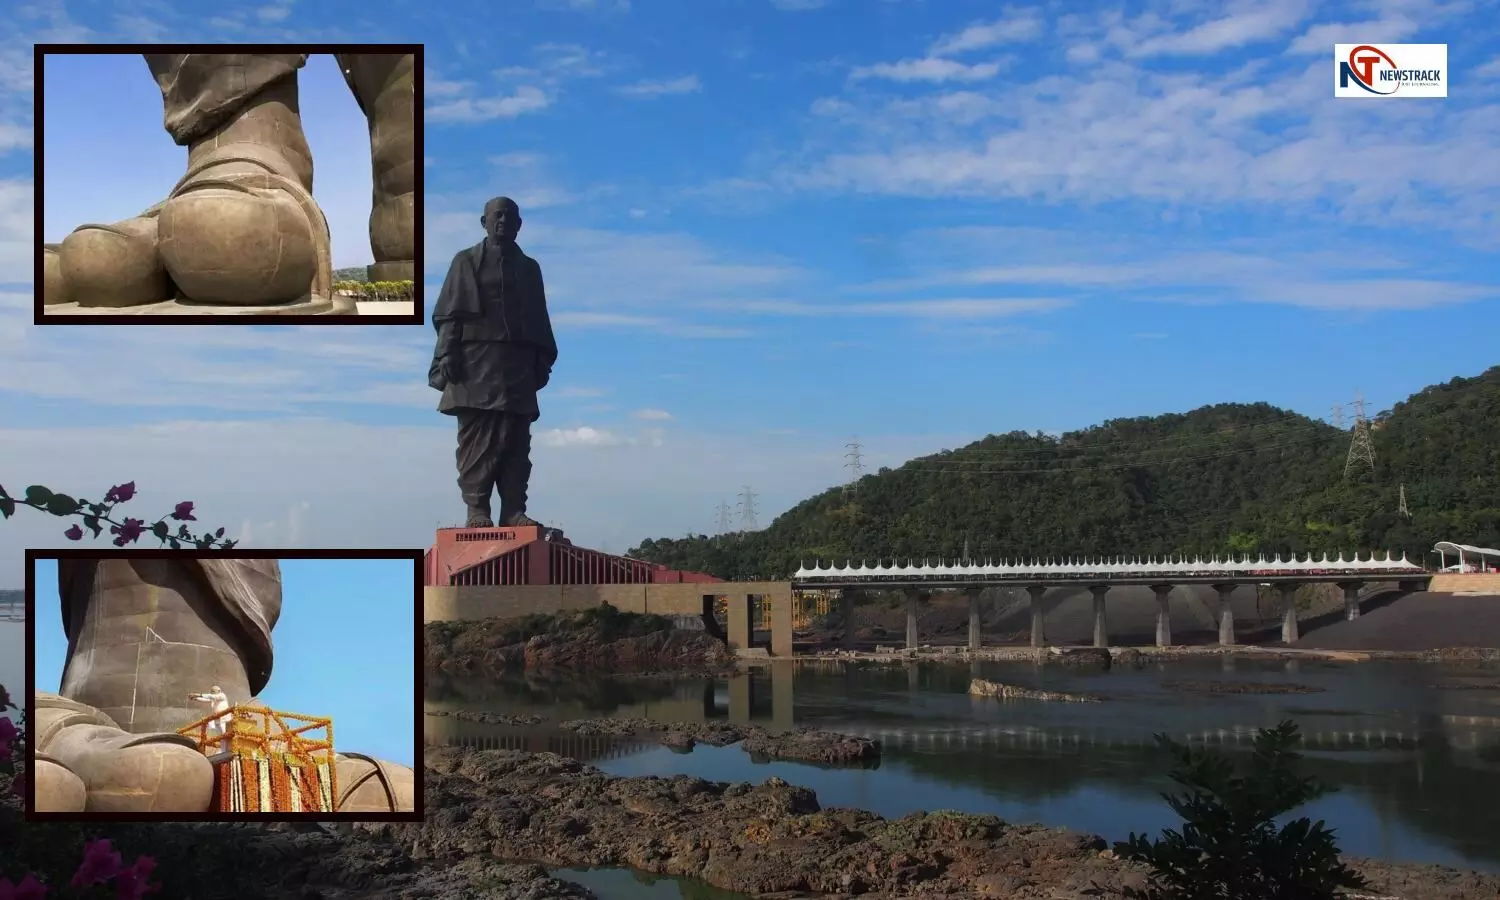 Statue of Unity Wiki in Hindi